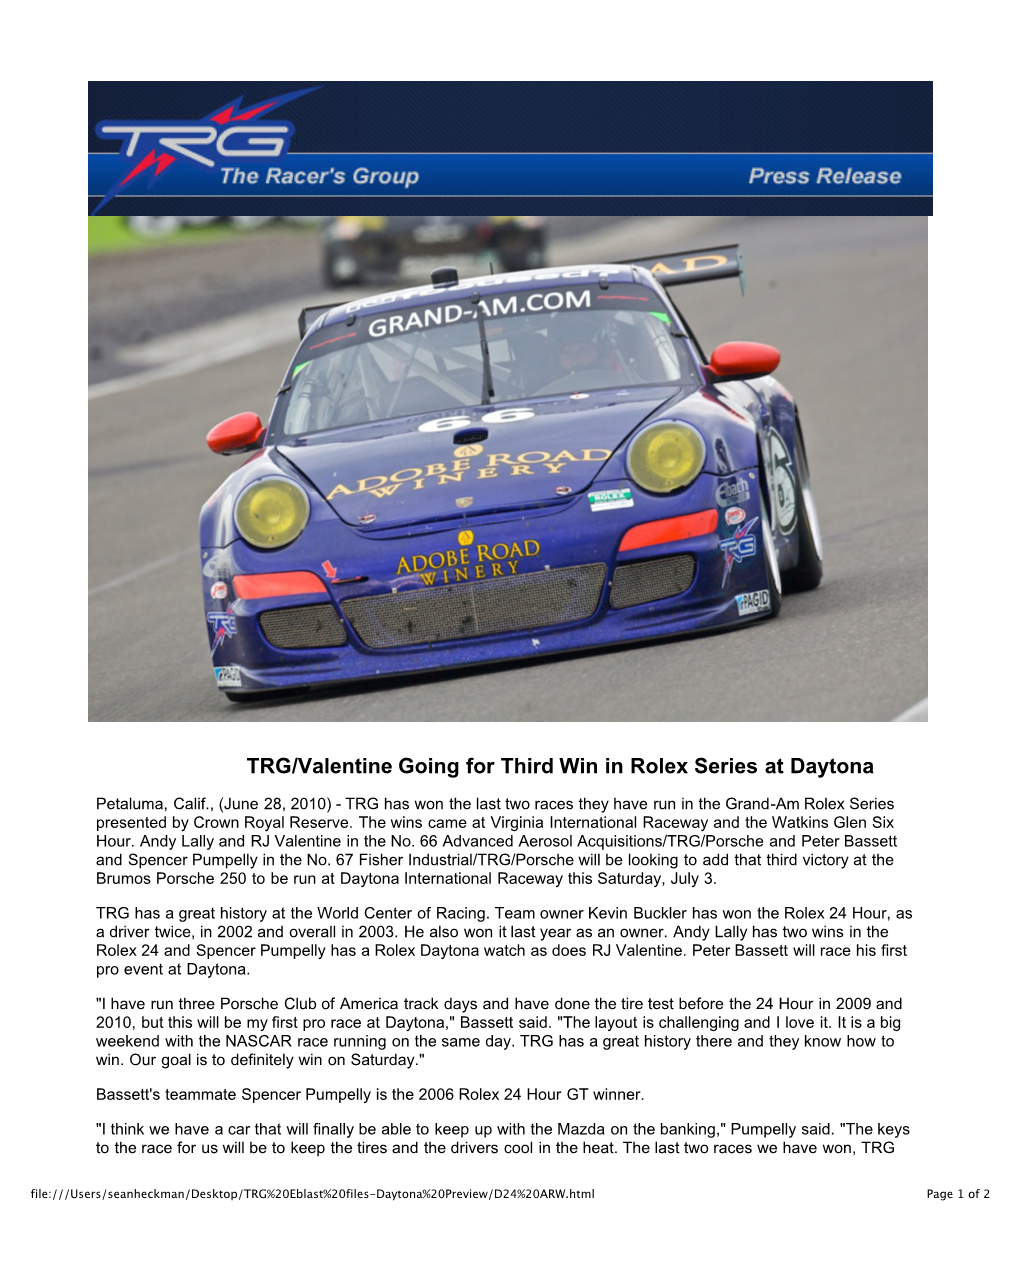 TRG/Valentine Going for Third Win in Rolex Series at Daytona